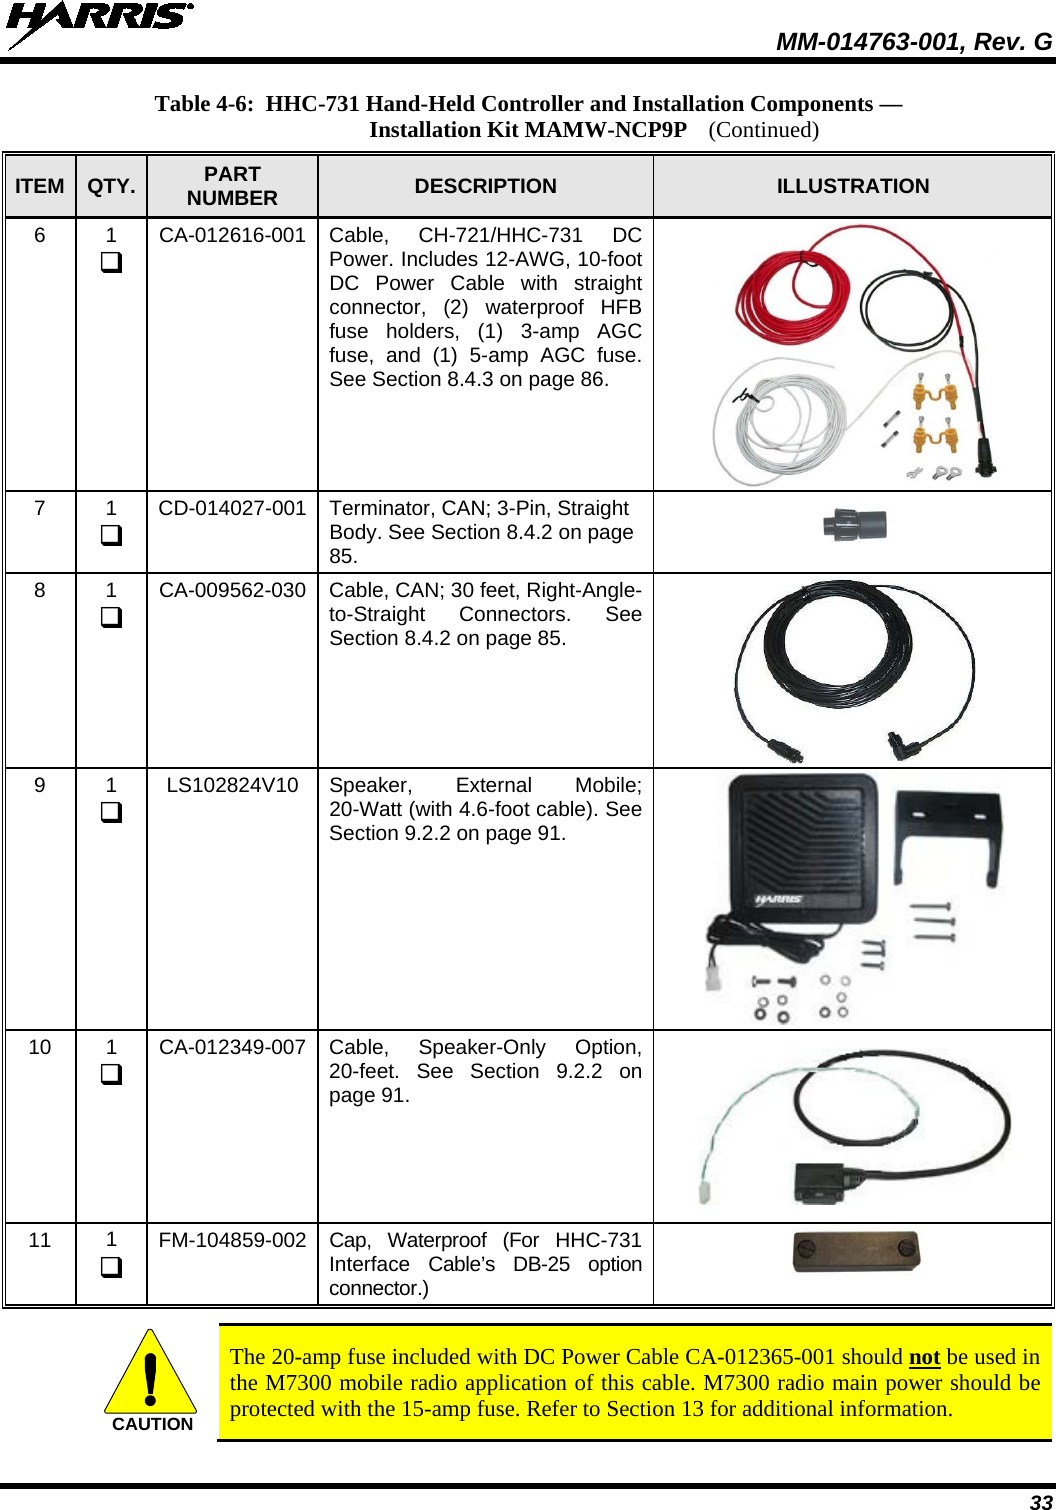  MM-014763-001, Rev. G 33 Table 4-6:  HHC-731 Hand-Held Controller and Installation Components —  Installation Kit MAMW-NCP9P ITEM QTY. PART NUMBER DESCRIPTION  ILLUSTRATION 6  1  CA-012616-001 Cable, CH-721/HHC-731 DC Power. Includes 12-AWG, 10-foot DC Power Cable with straight connector, (2) waterproof HFB fuse holders, (1) 3-amp AGC fuse, and (1) 5-amp AGC fuse. See Section 8.4.3 on page 86.  7  1  CD-014027-001 Terminator, CAN; 3-Pin, Straight Body. See Section 8.4.2 on page 85.      8  1  CA-009562-030 Cable, CAN; 30 feet, Right-Angle-to-Straight Connectors. See Section 8.4.2 on page 85.  9  1  LS102824V10 Speaker, External Mobile; 20-Watt (with 4.6-foot cable). See Section 9.2.2 on page 91.  10 1  CA-012349-007 Cable,  Speaker-Only Option, 20-feet.  See Section 9.2.2 on page 91.  11 1  FM-104859-002 Cap, Waterproof (For HHC-731 Interface Cable’s  DB-25  option connector.)     The 20-amp fuse included with DC Power Cable CA-012365-001 should not be used in the M7300 mobile radio application of this cable. M7300 radio main power should be protected with the 15-amp fuse. Refer to Section 13 for additional information.  CAUTION (Continued) 